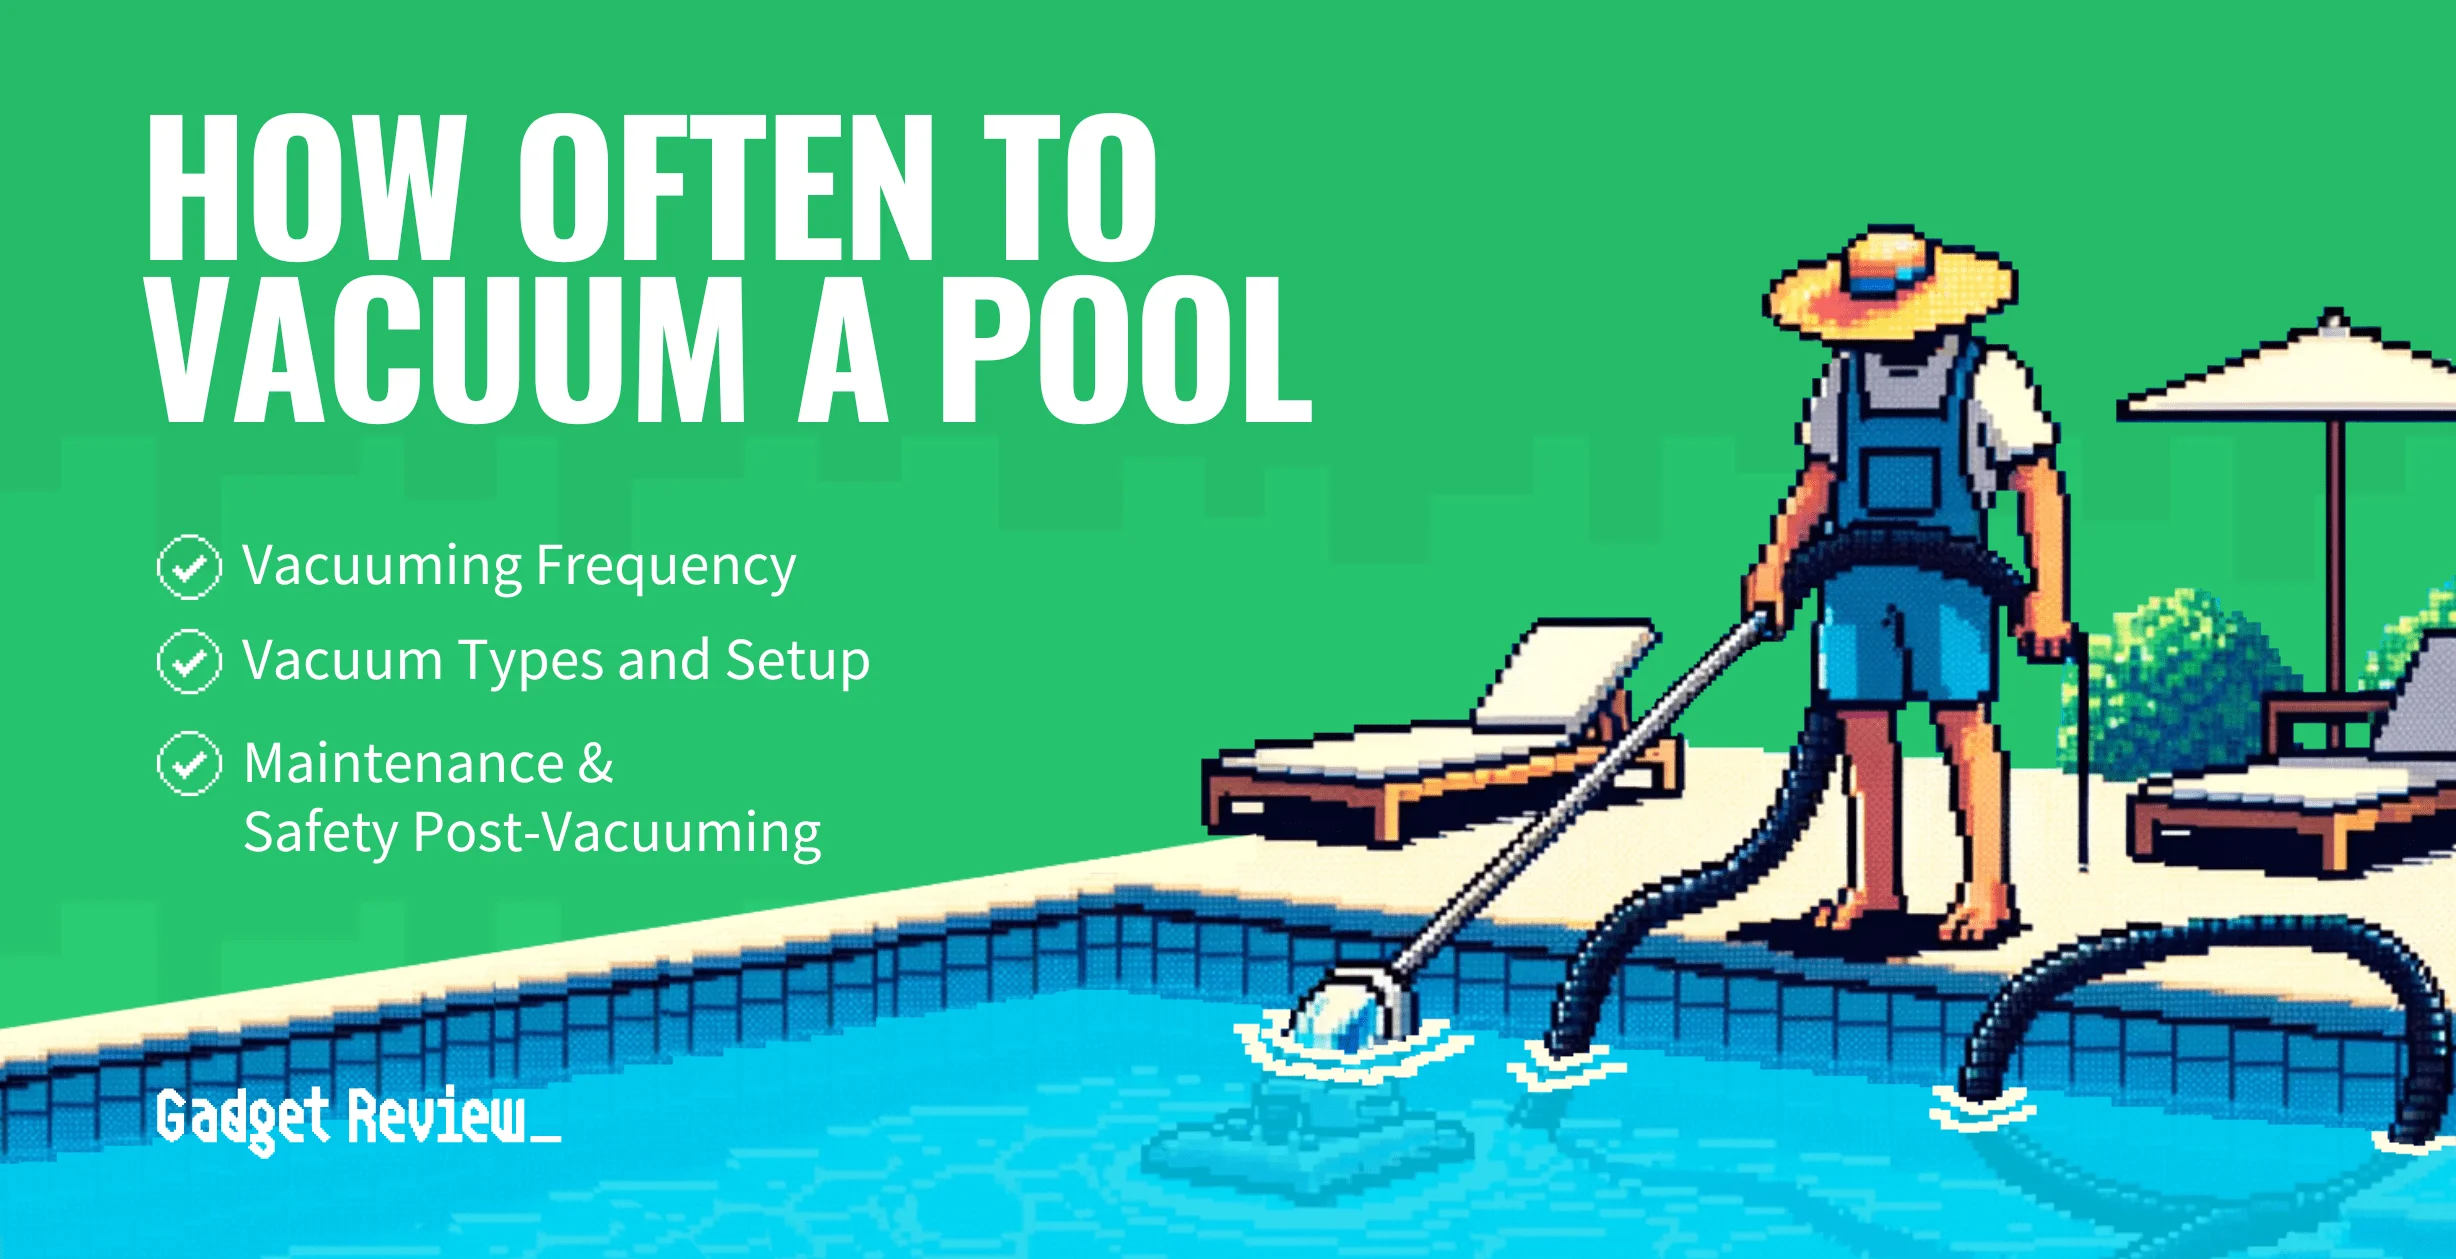 How Often to Vacuum a Pool